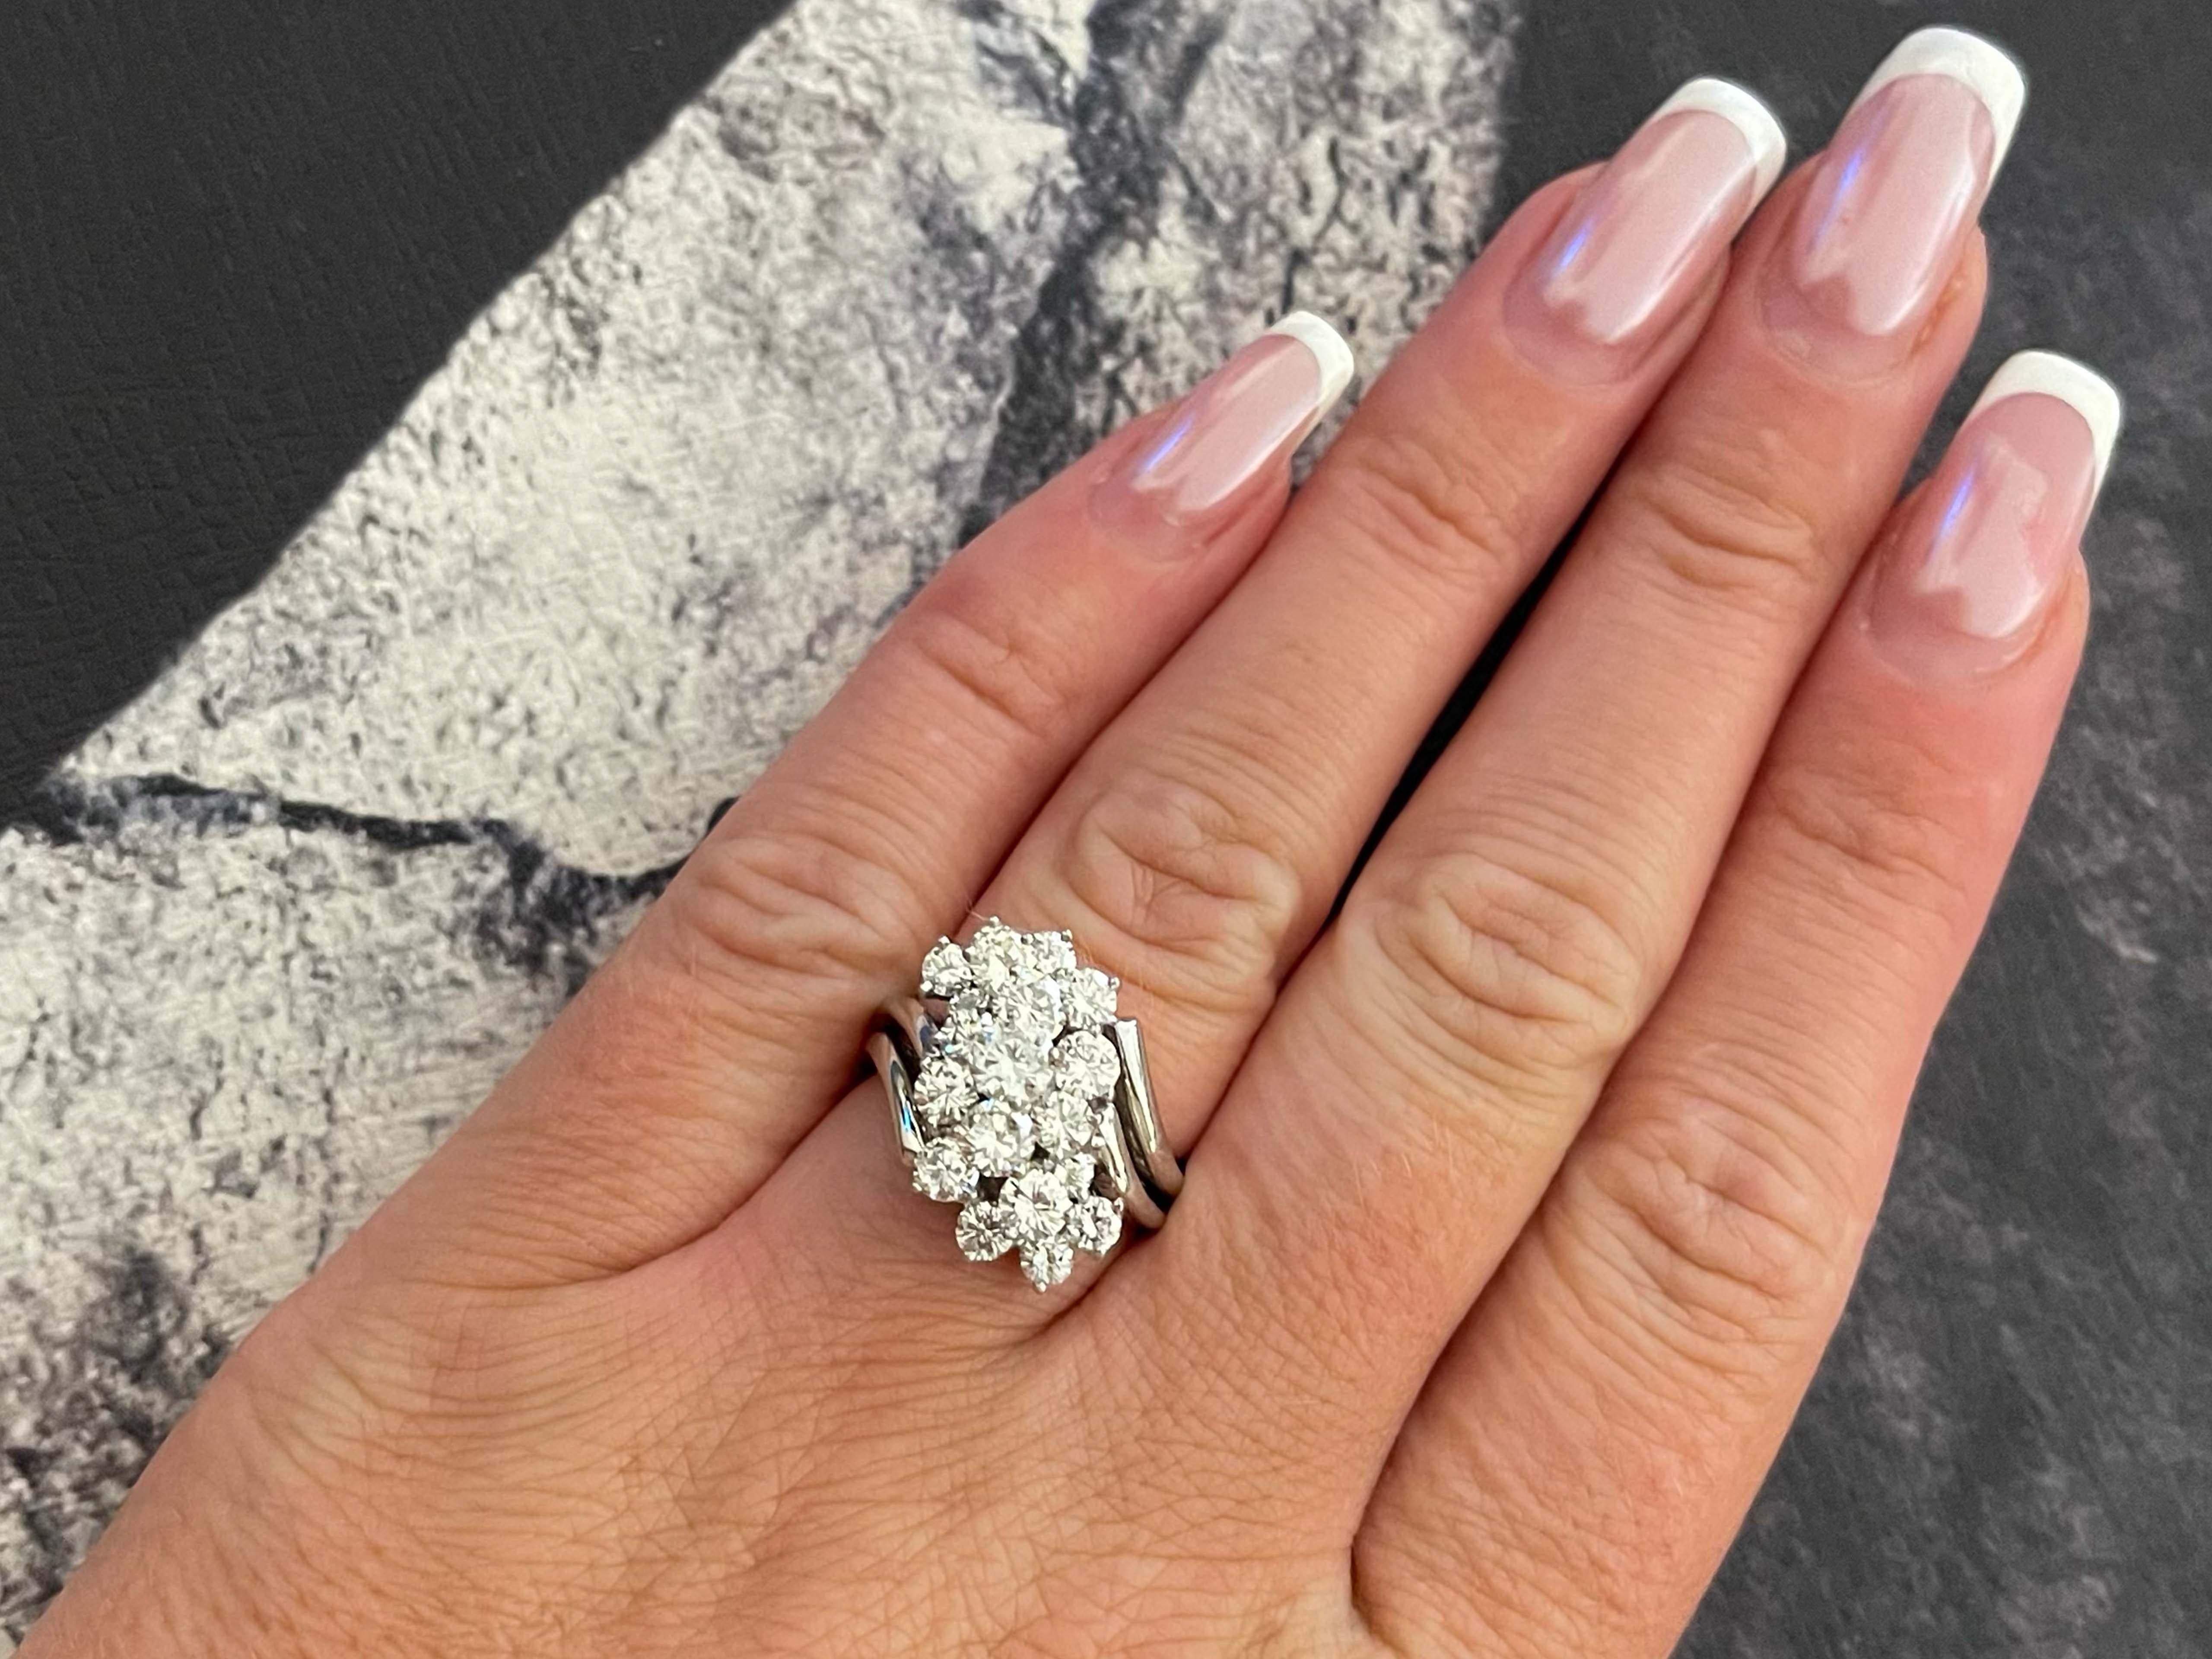 Item Specifications:

Metal: 18k White Gold 

Diamond Count: 19 brilliant cut

Diamond Carat Weight: ~2.00 carats

Diamond Color: G

Diamond Clarity: VS1-SI1

Ring Size: 6.25 (resizable)

Total Weight: 7.7 Grams

Stamped: 